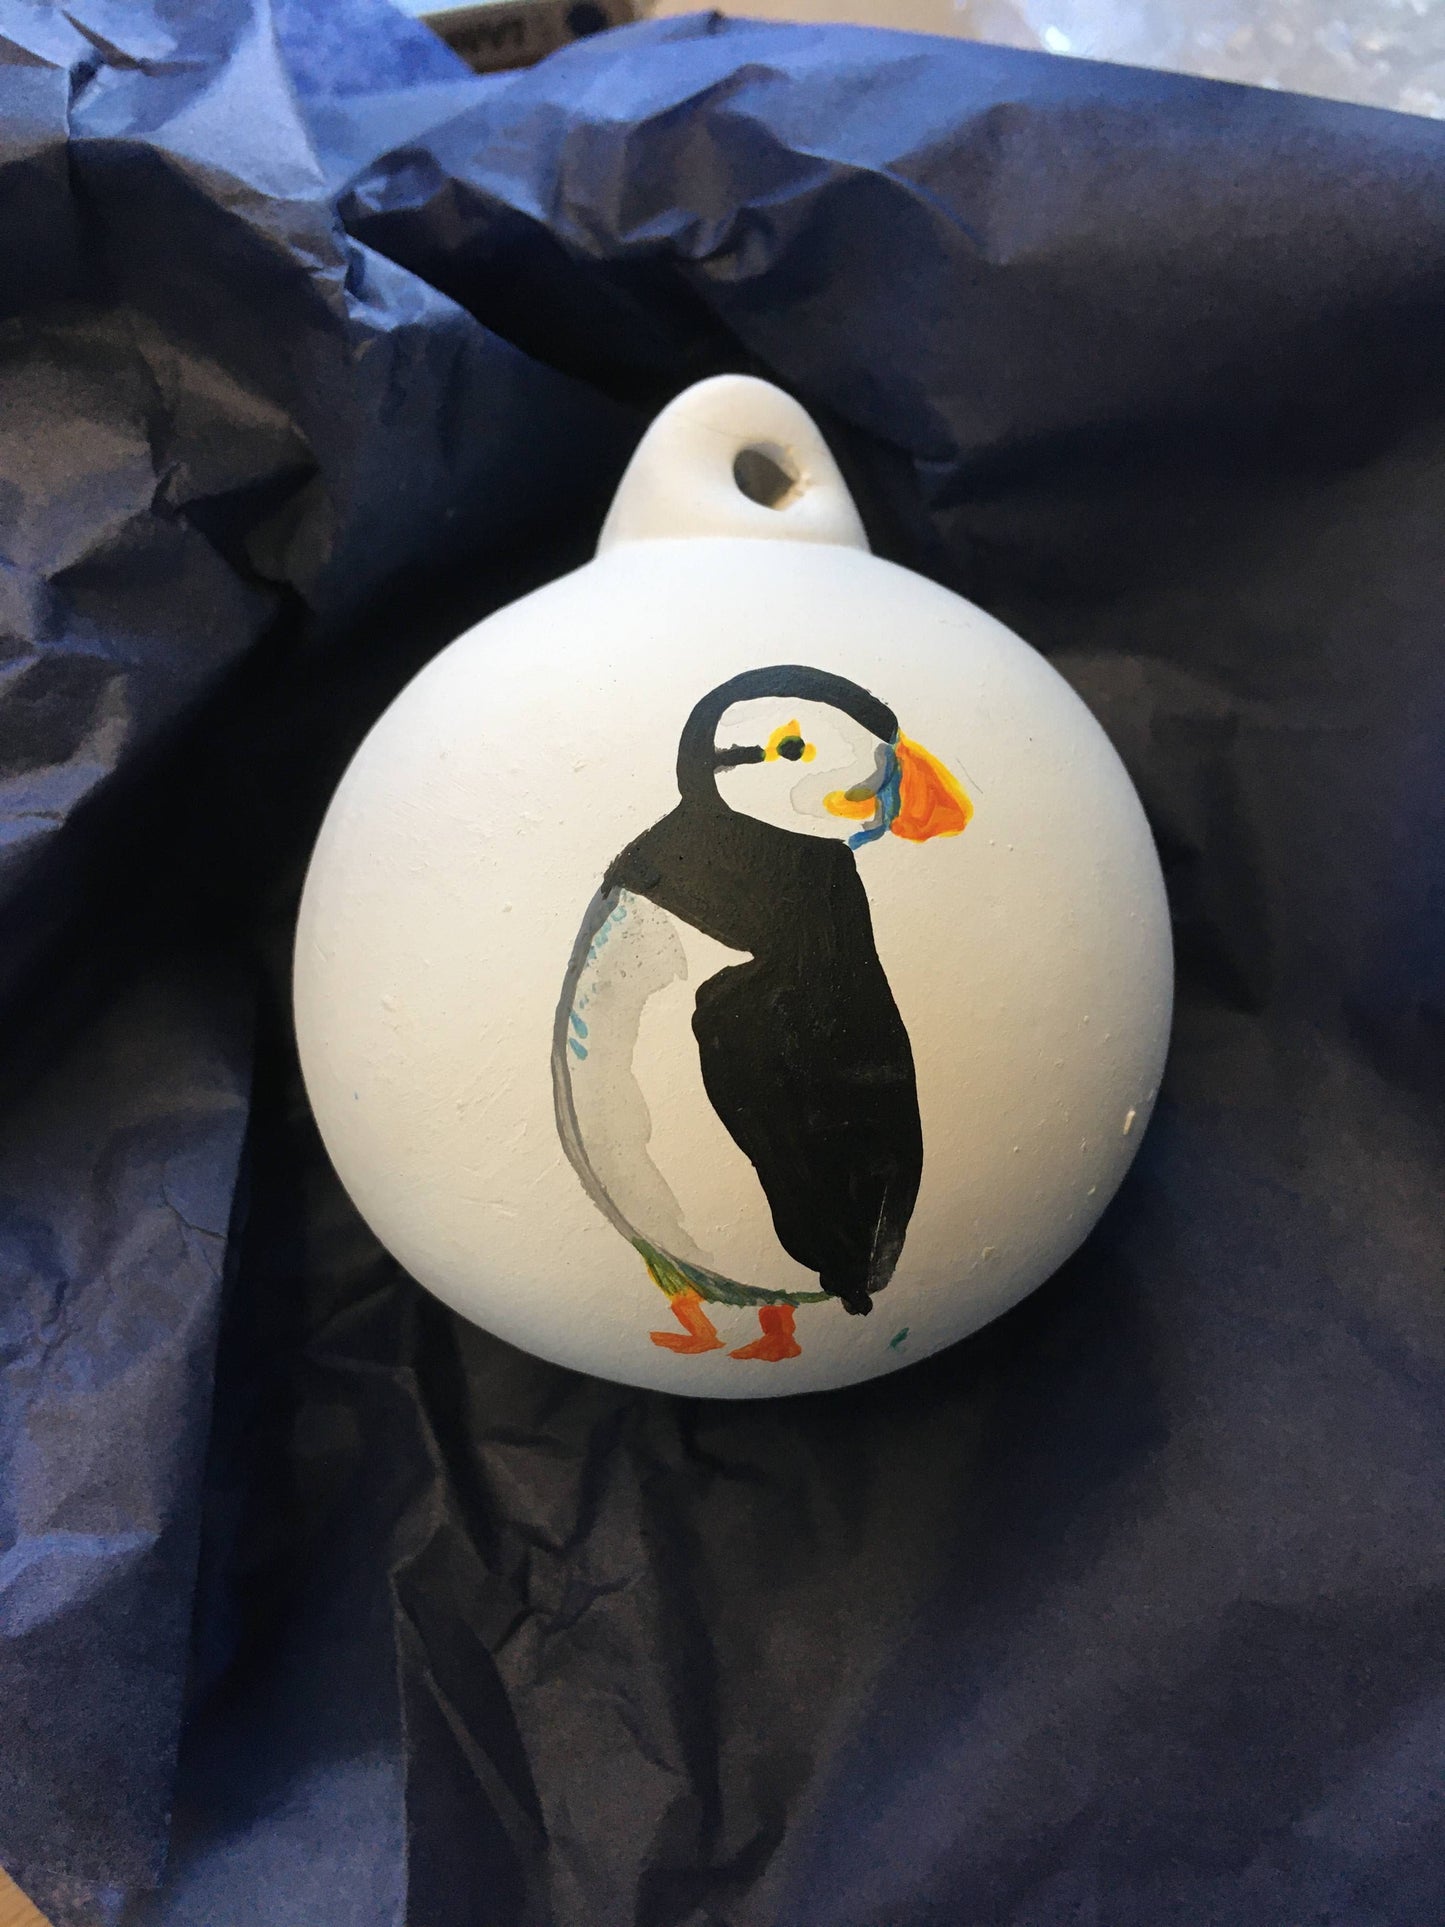 And Hope Designs Puffin ceramic Christmas baubles